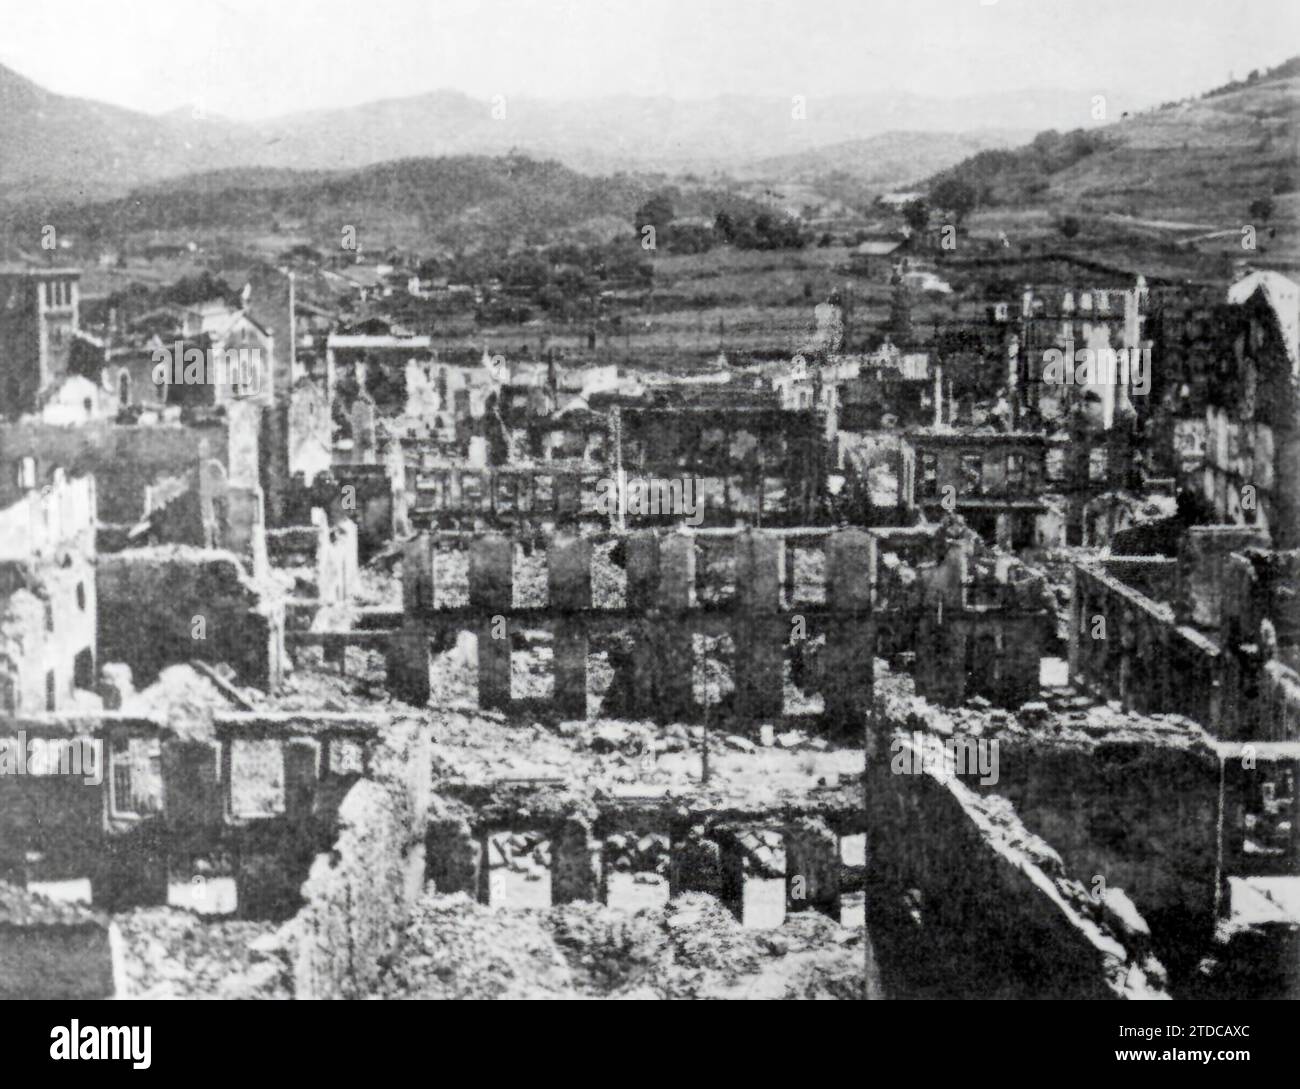 Guernica after the Bombings of 1937. Credit: Album / Archivo ABC Stock Photo